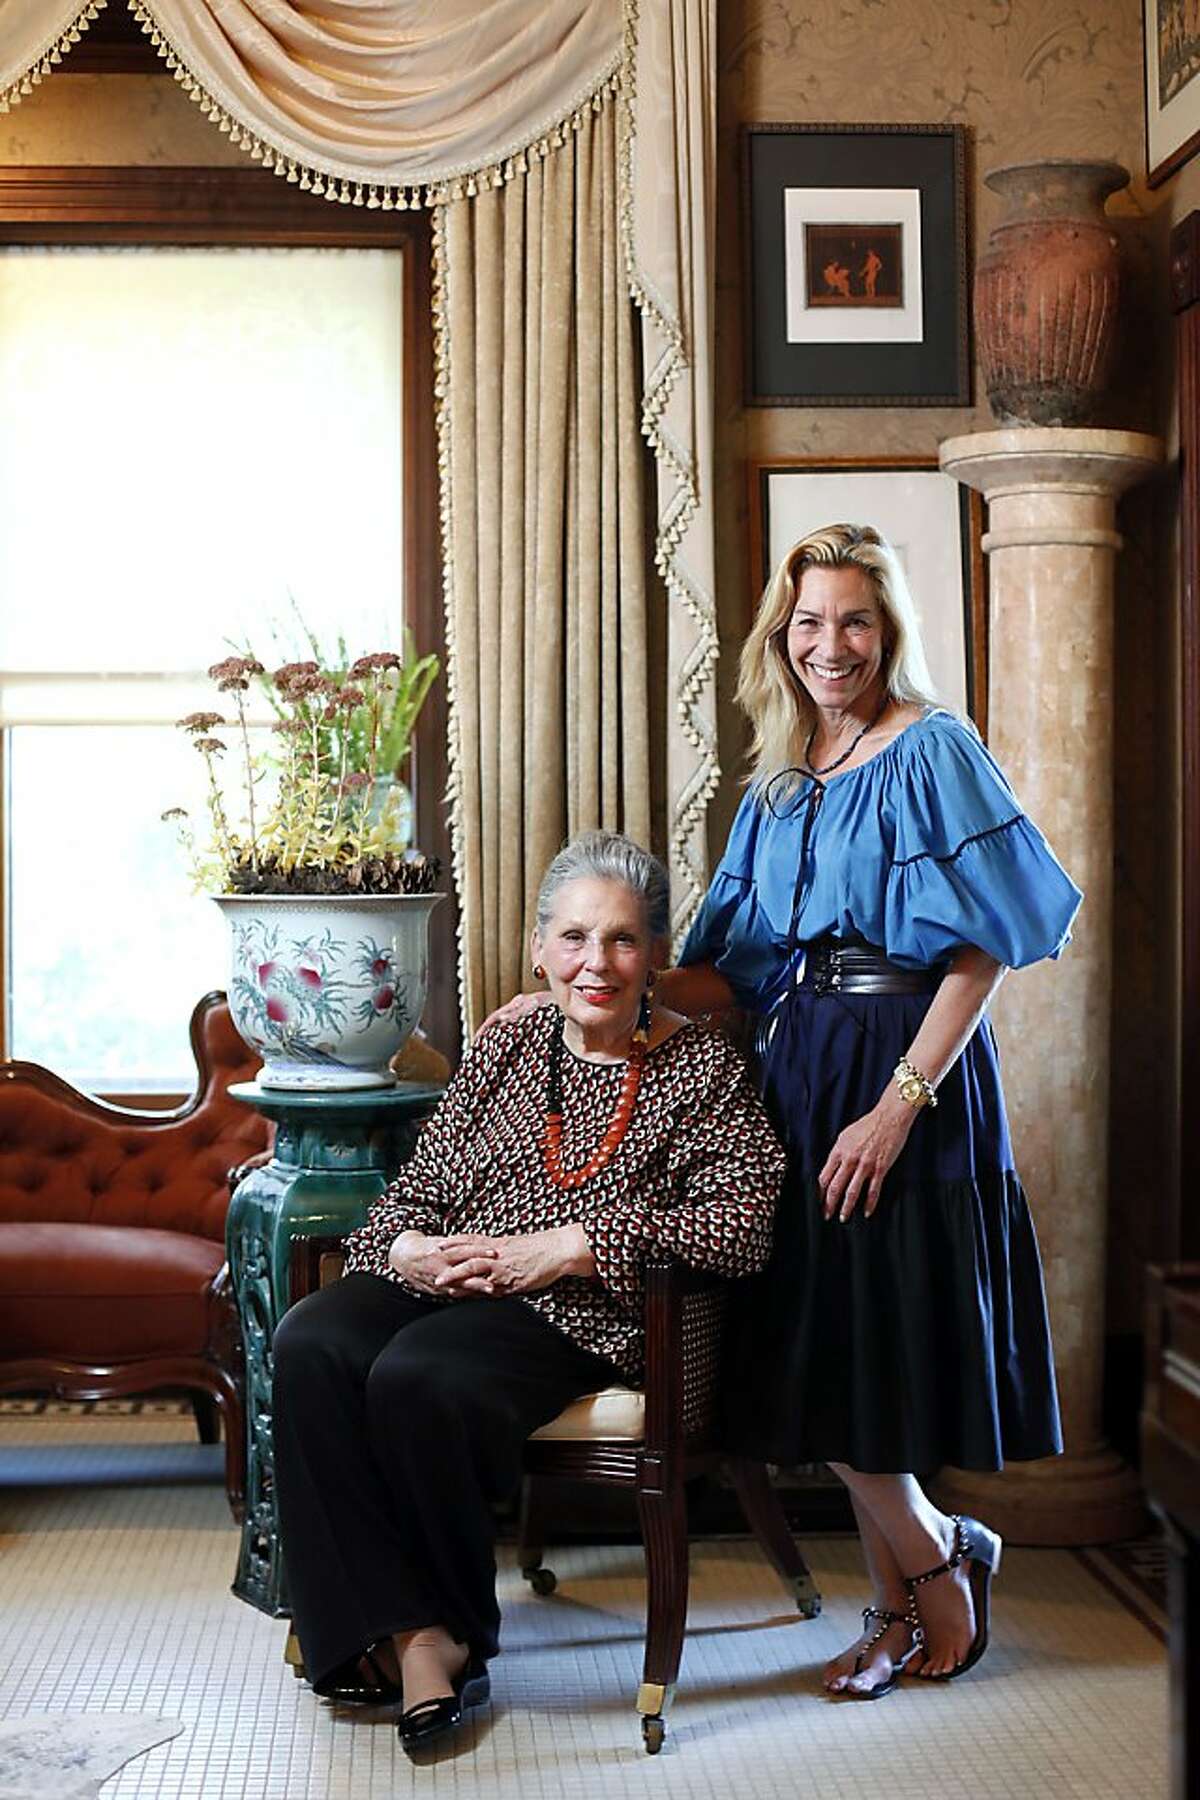 Audrey Sterling and her daughter Joy are photographed at home in Sebastopol, Calif., on Friday, October 18, 2013. The two share a love of fashion as well as wine.